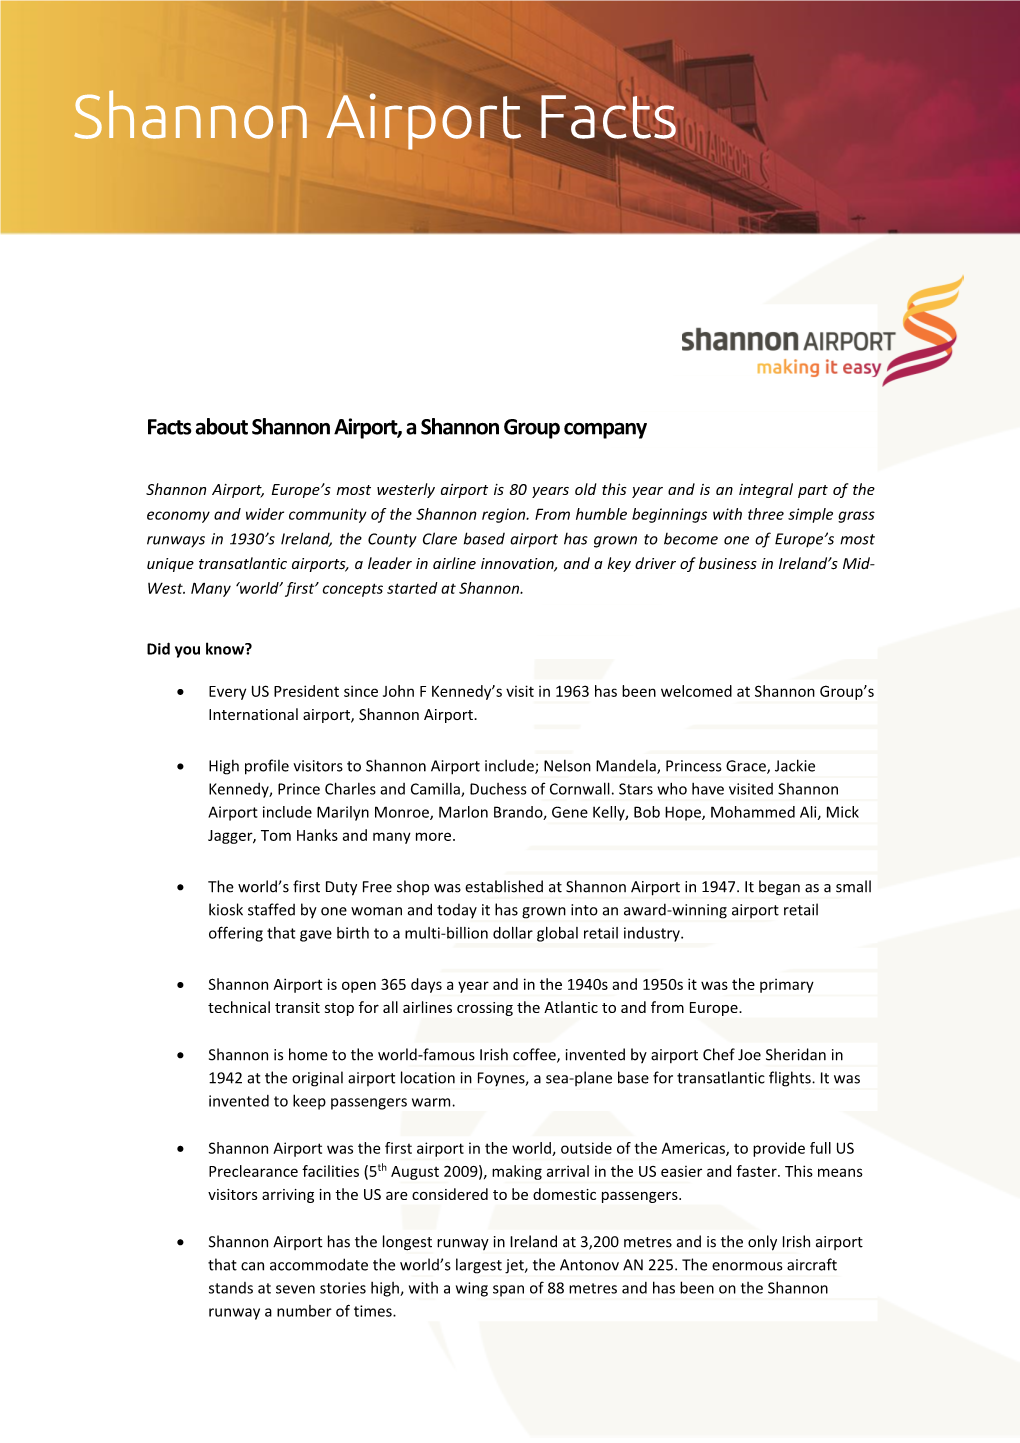 Shannon Airport Facts